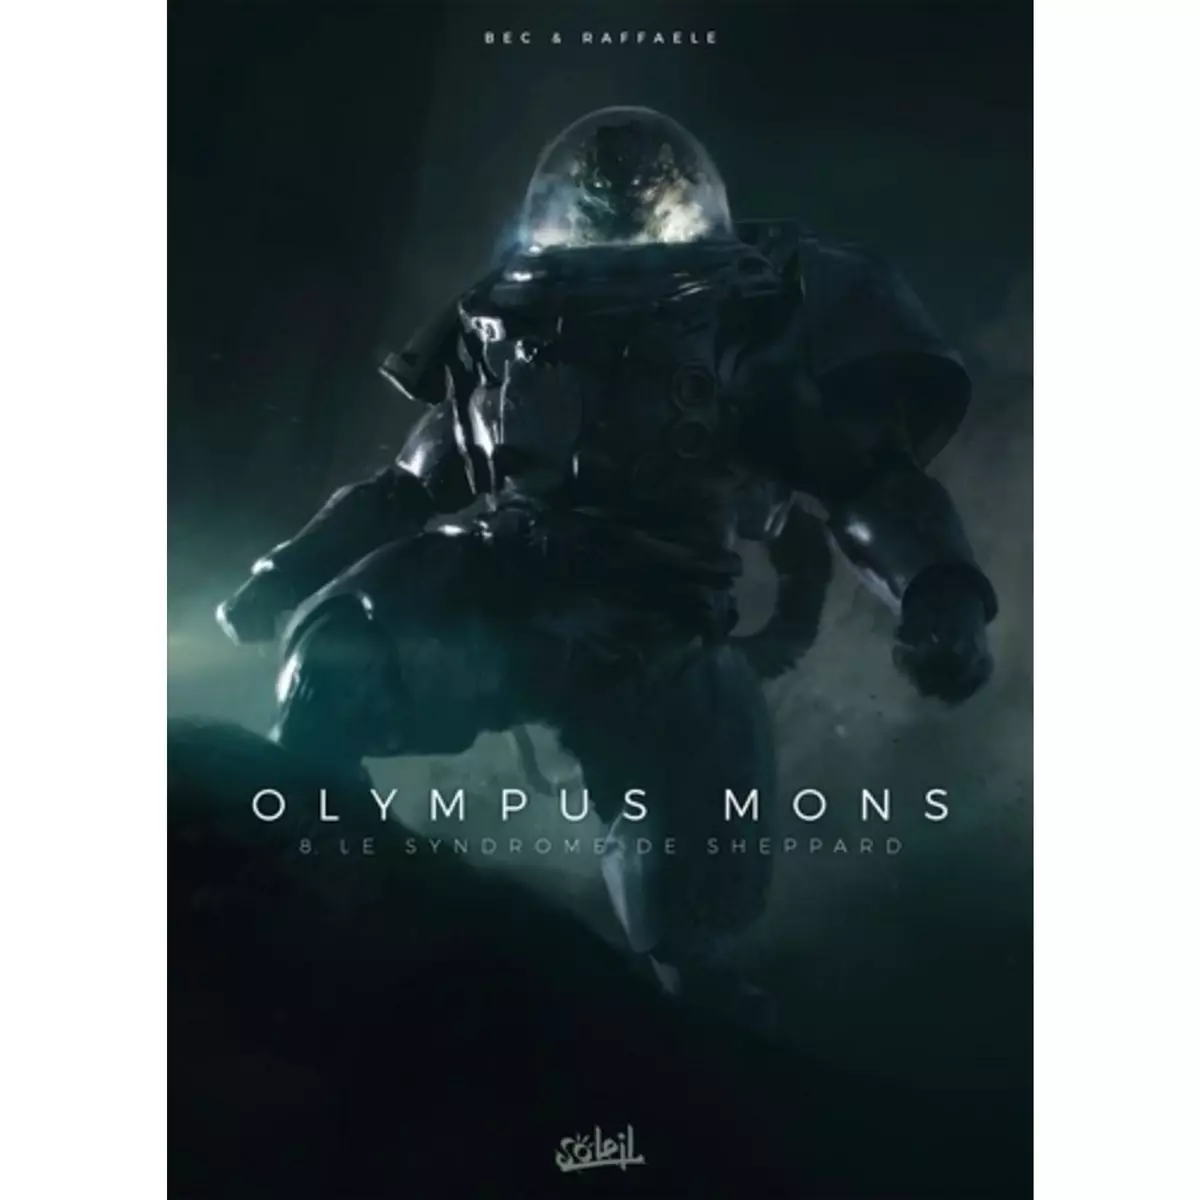  OLYMPUS MONS TOME 8 : LE SYNDROME DE SHEPPARD, Bec Christophe